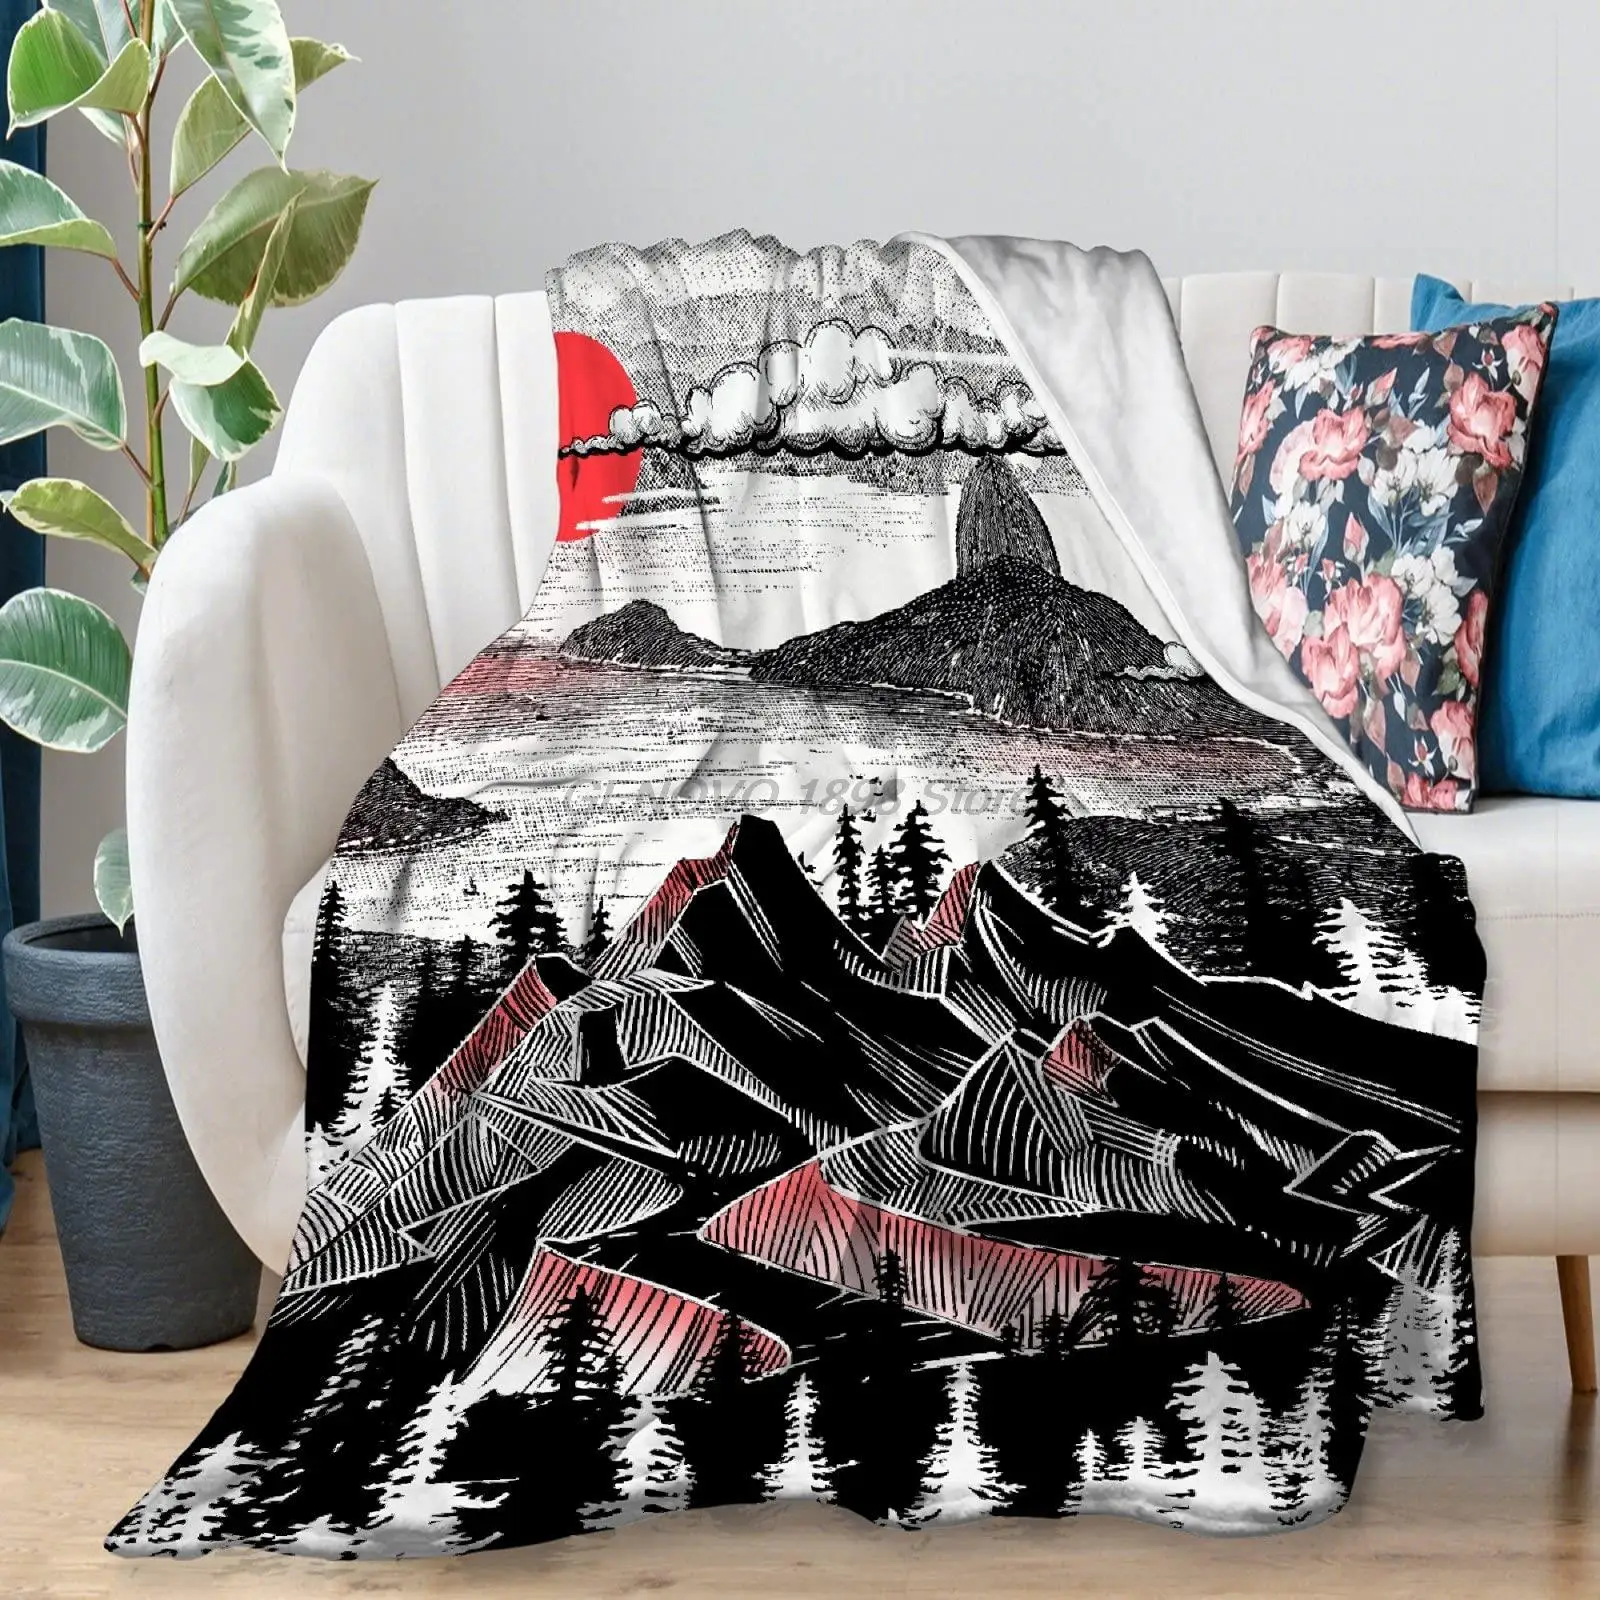 

Yaoola Mountain Flannel Blanket, All Season Soft Cozy Plush Bed Throw fit Bedroom Living Room Sofa Couch Bedding Office Cinema F